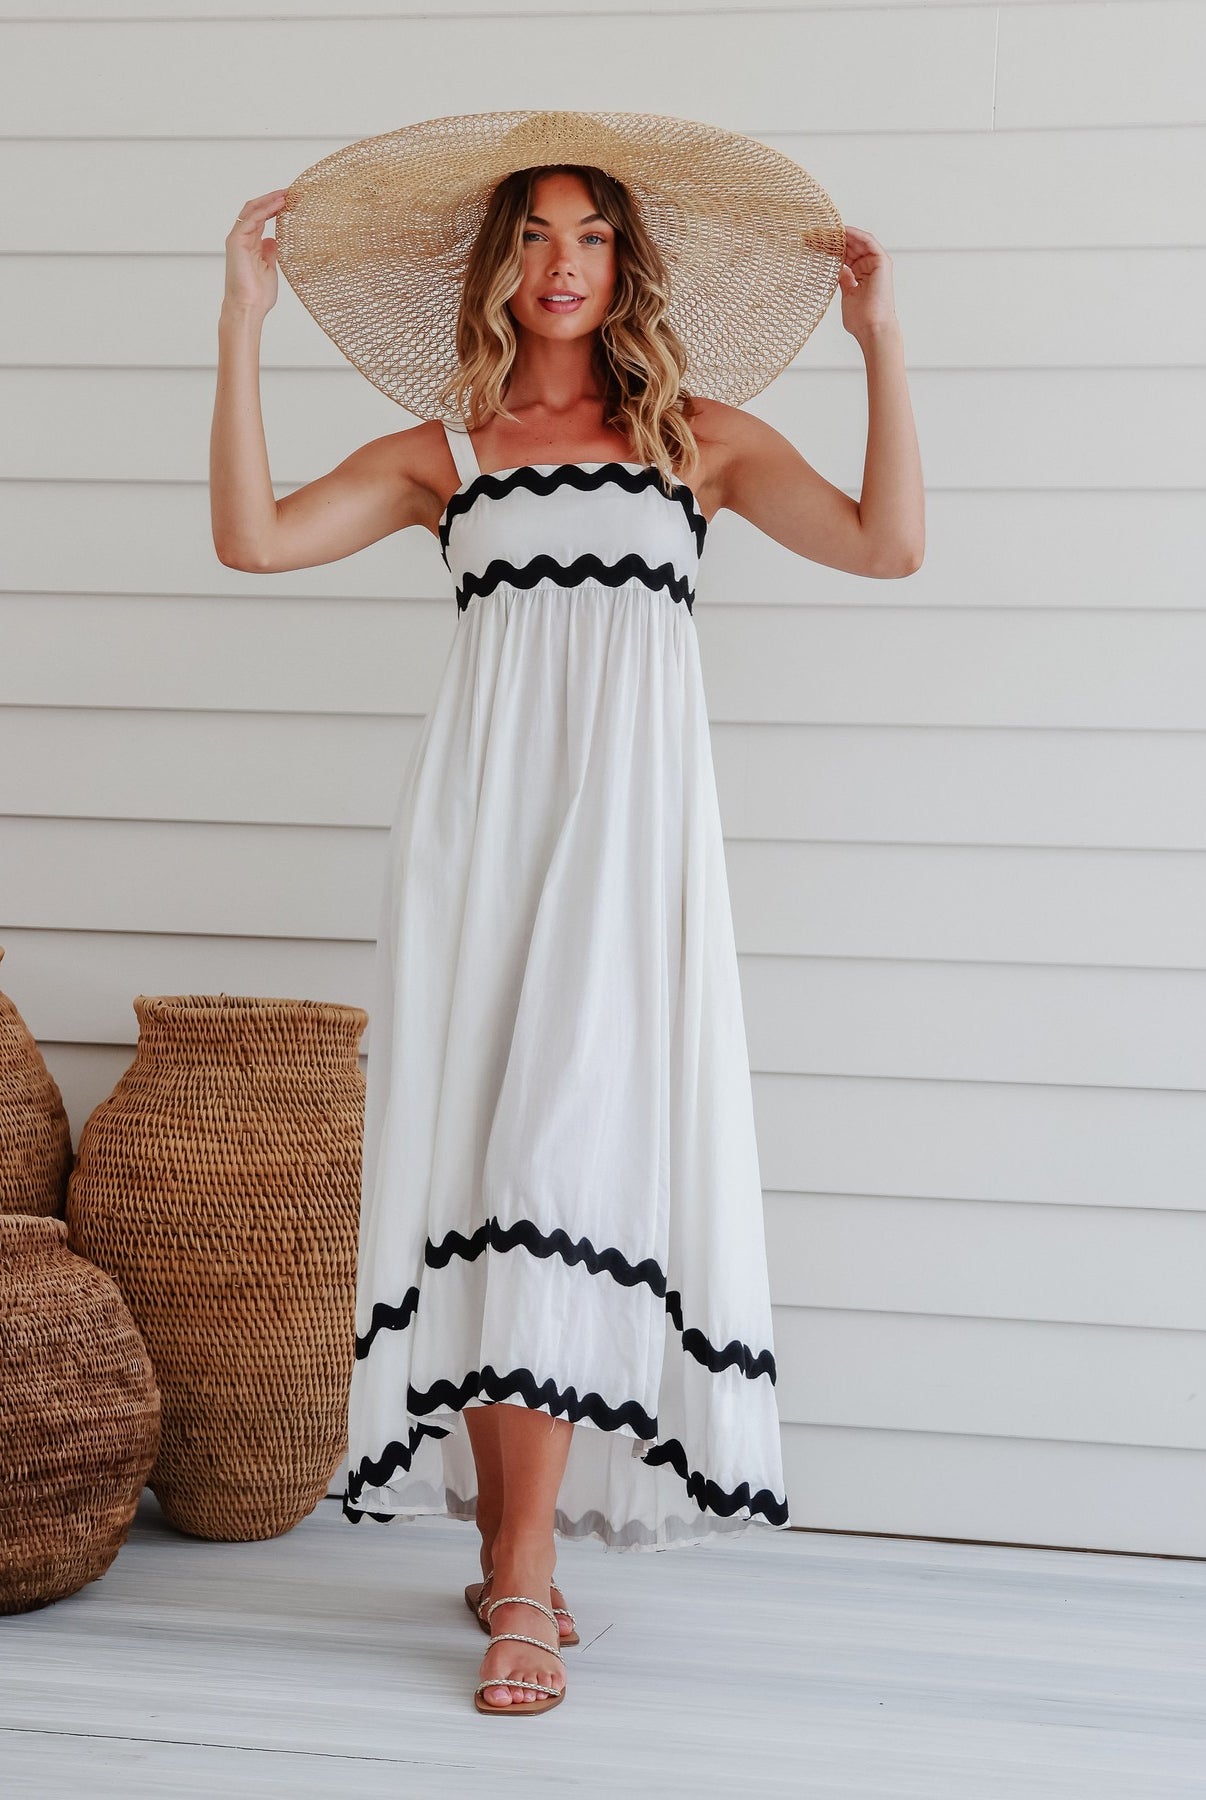 Black and white dress with Ric Rac Detailing